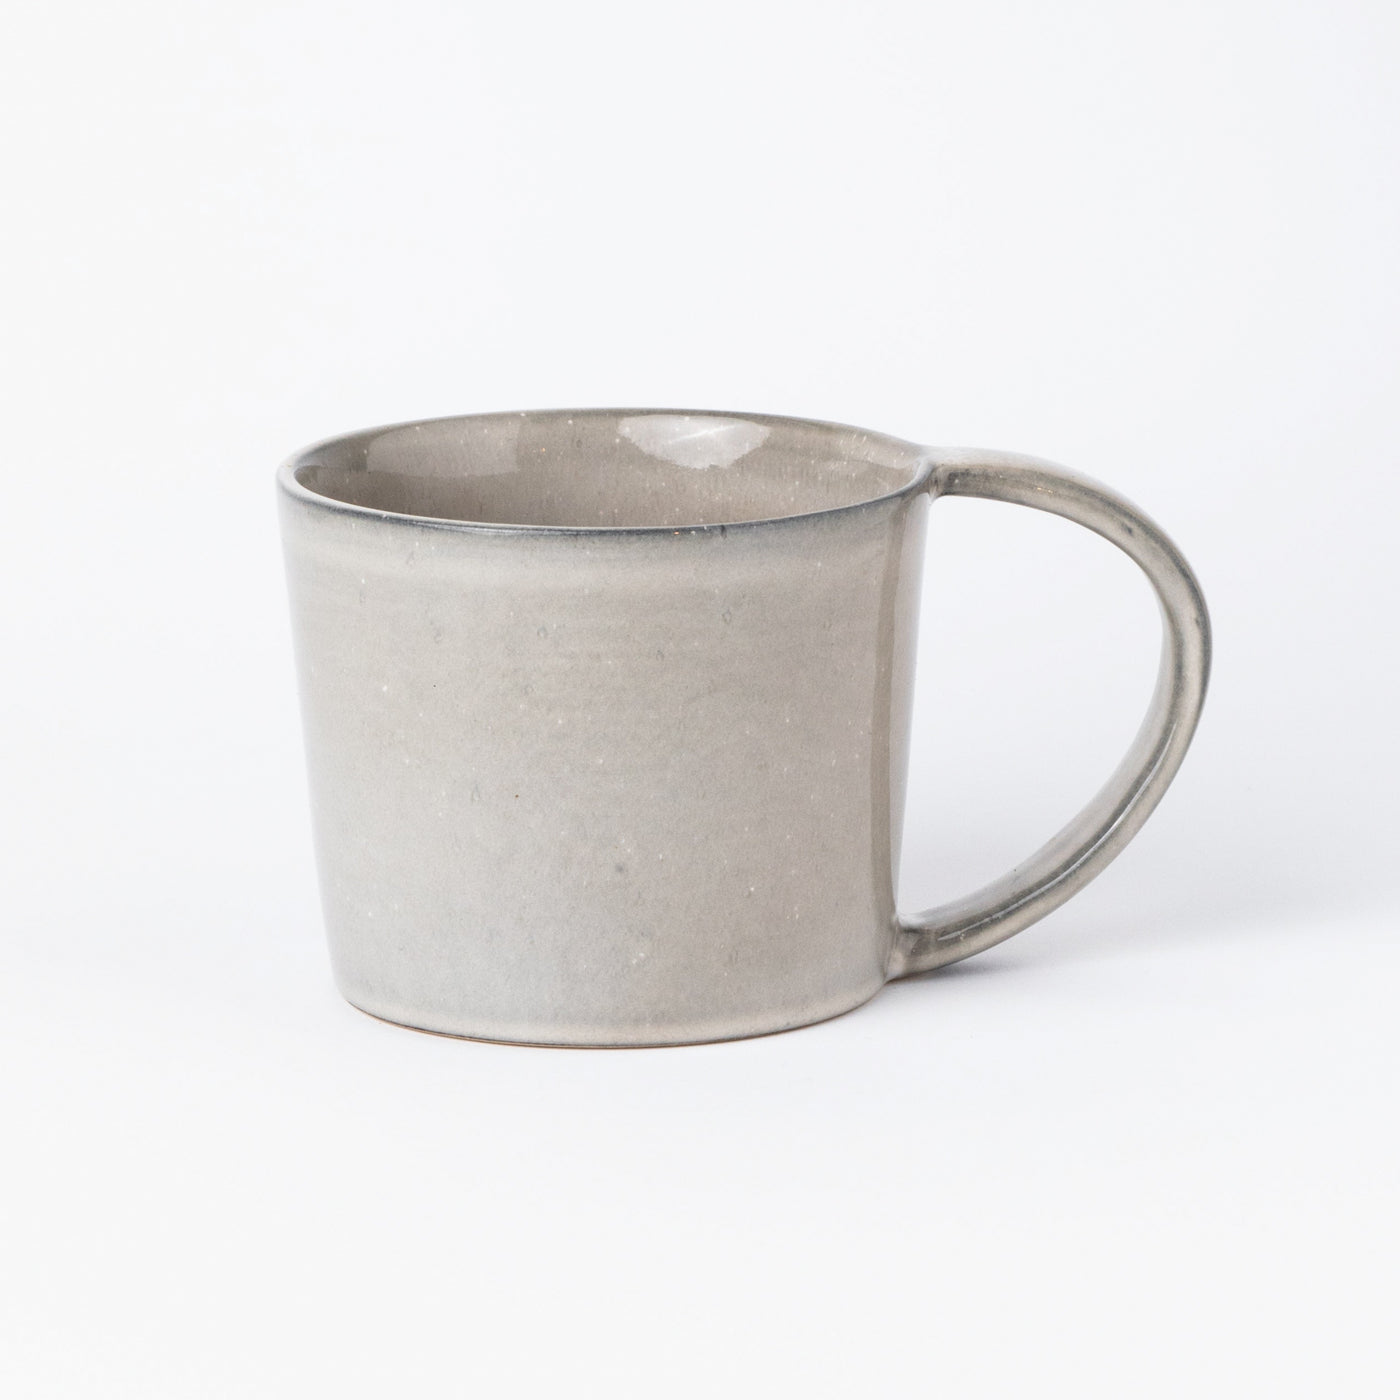 Large tea cup with handle modern style gray reactive glaze stoneware